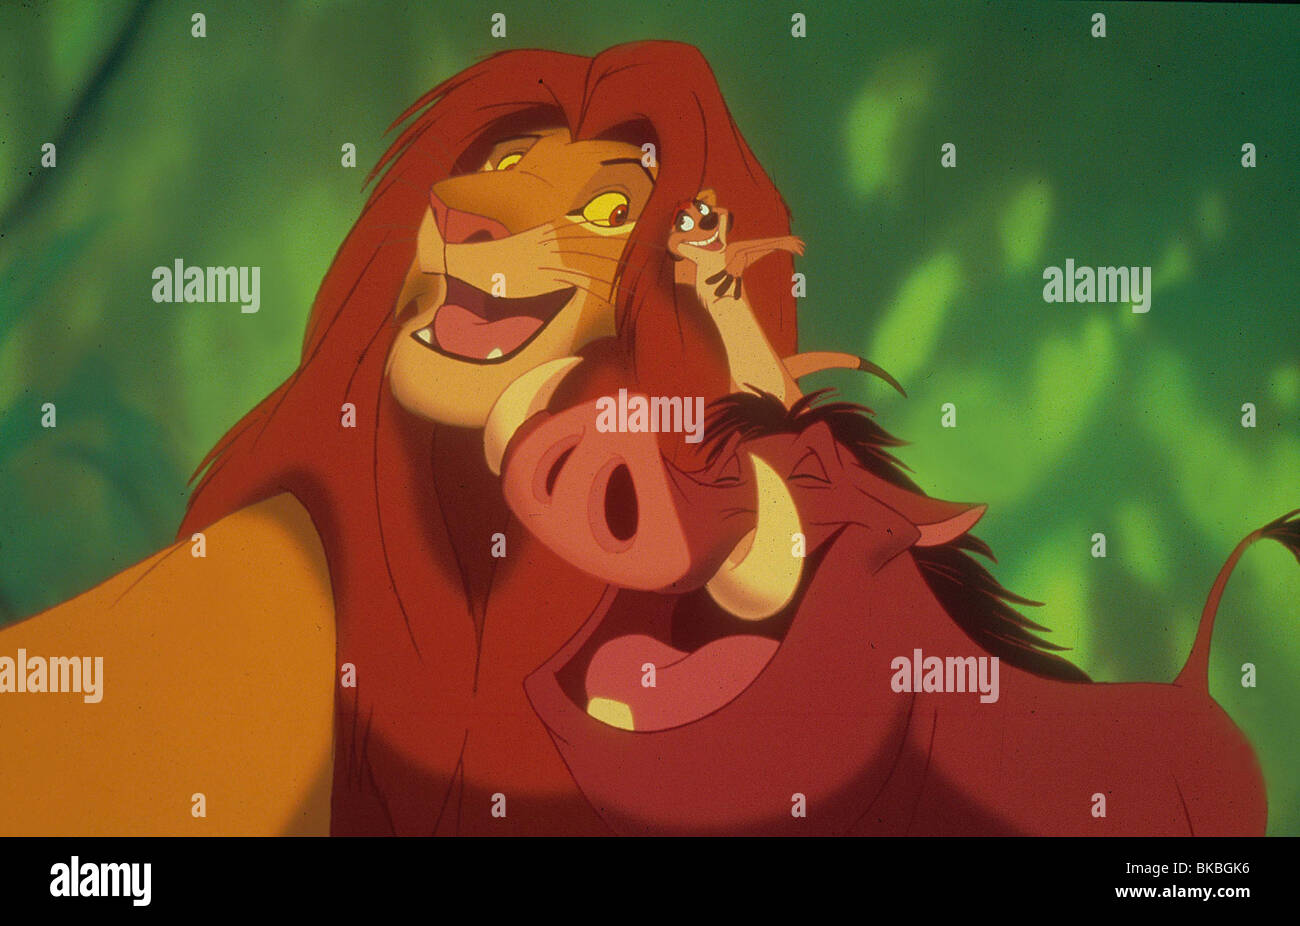 THE LION KING (1994) ANIMATED CREDIT DISNEY LINK 088 Stock Photo